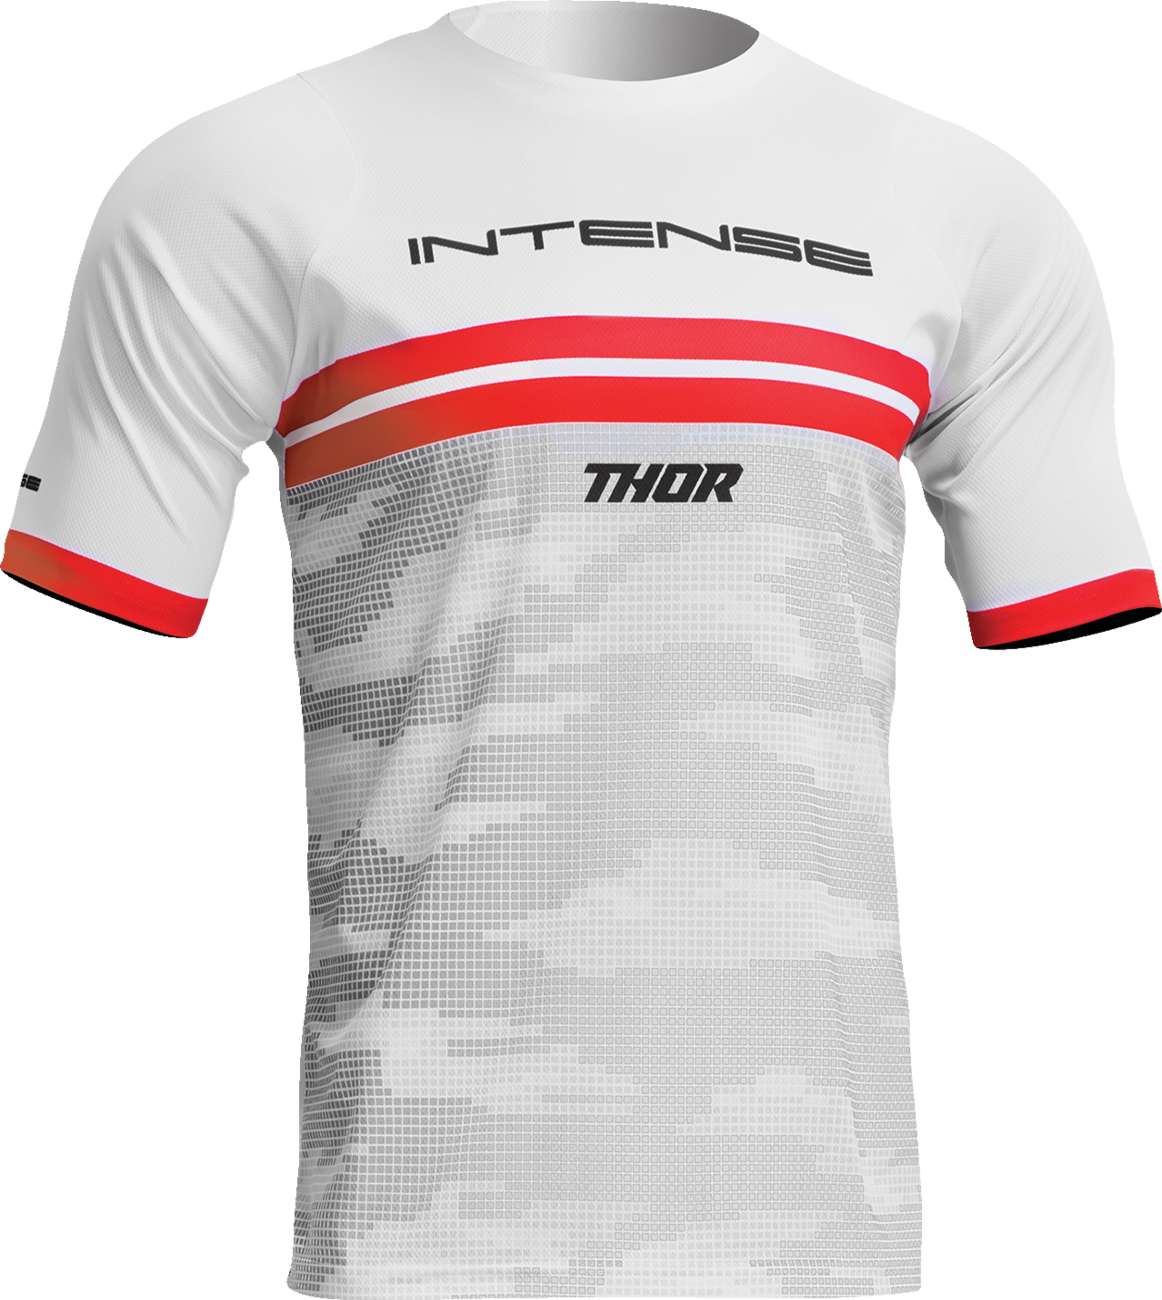 THOR Intense Assist Decoy Jersey - Short-Sleeve - White/Camo - Small 5020-0199